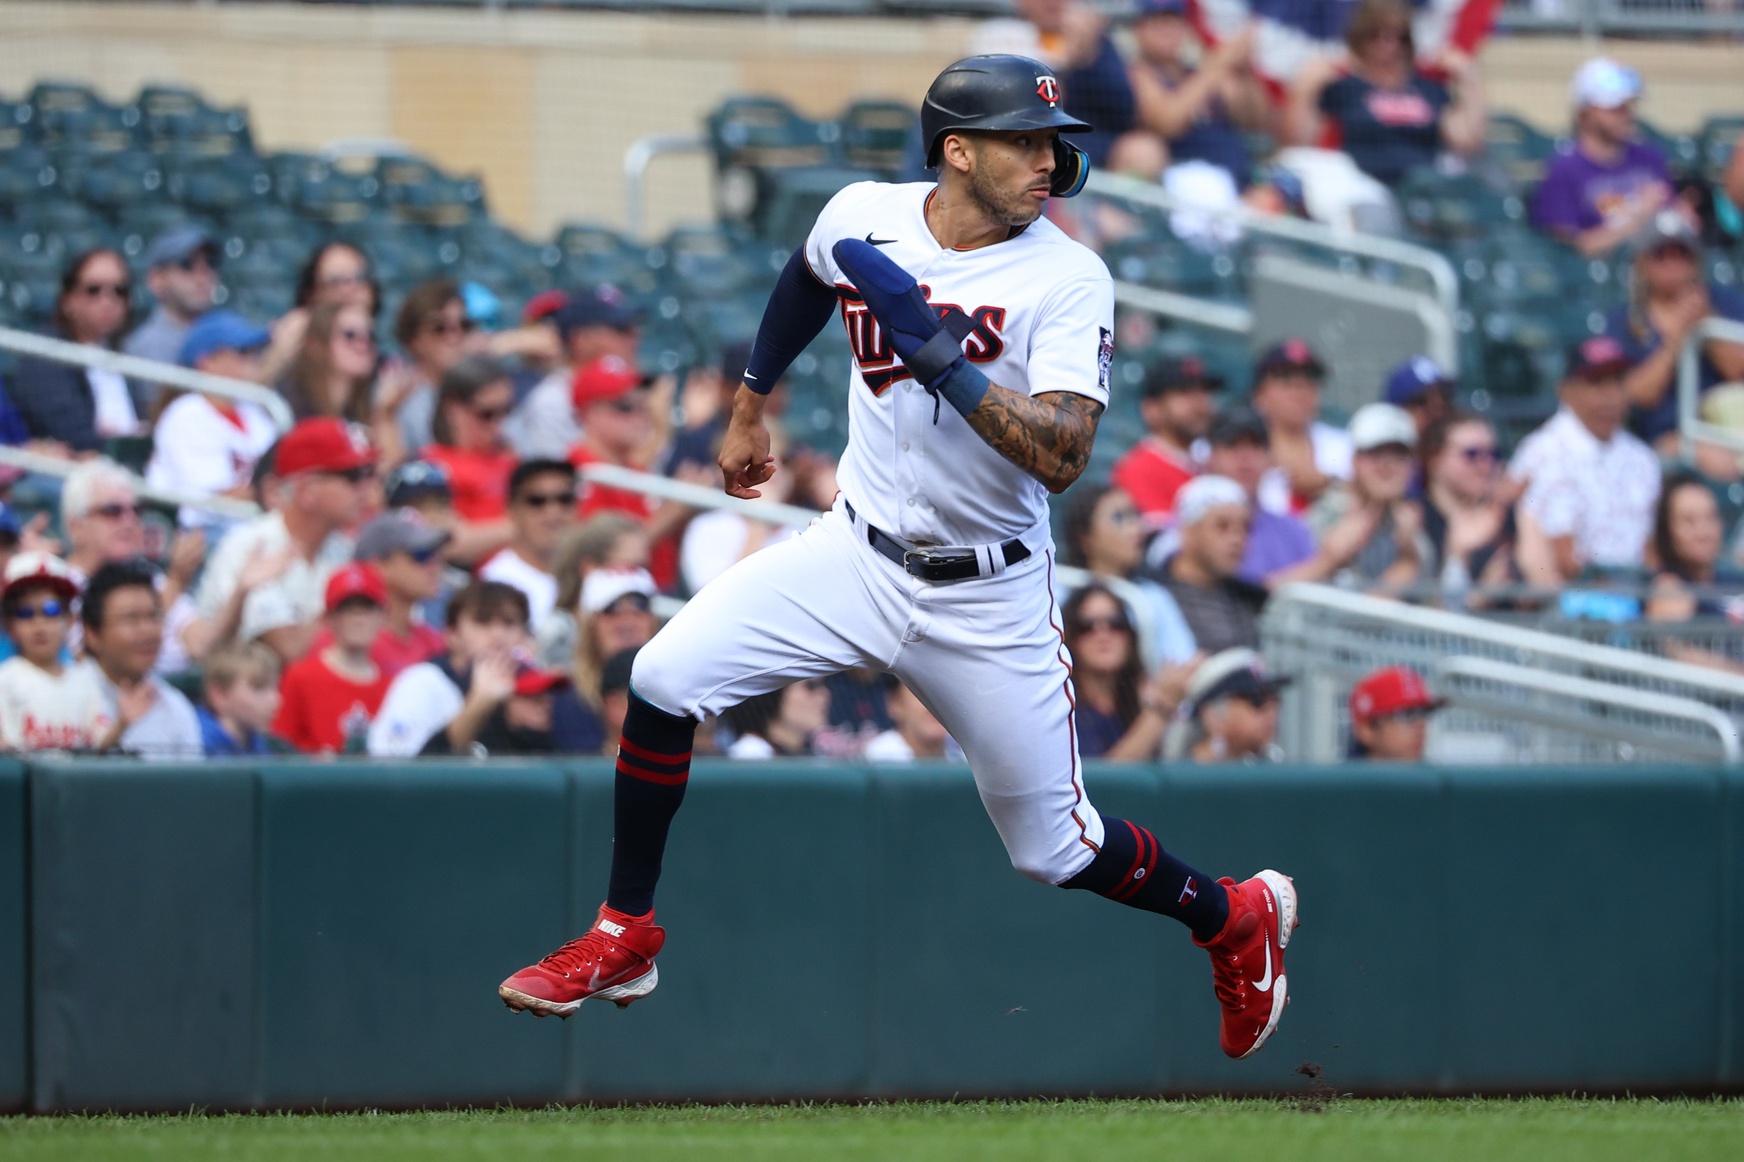 Analysis: Red Sox outfield was mixed bag in 2023 but promising future ahead